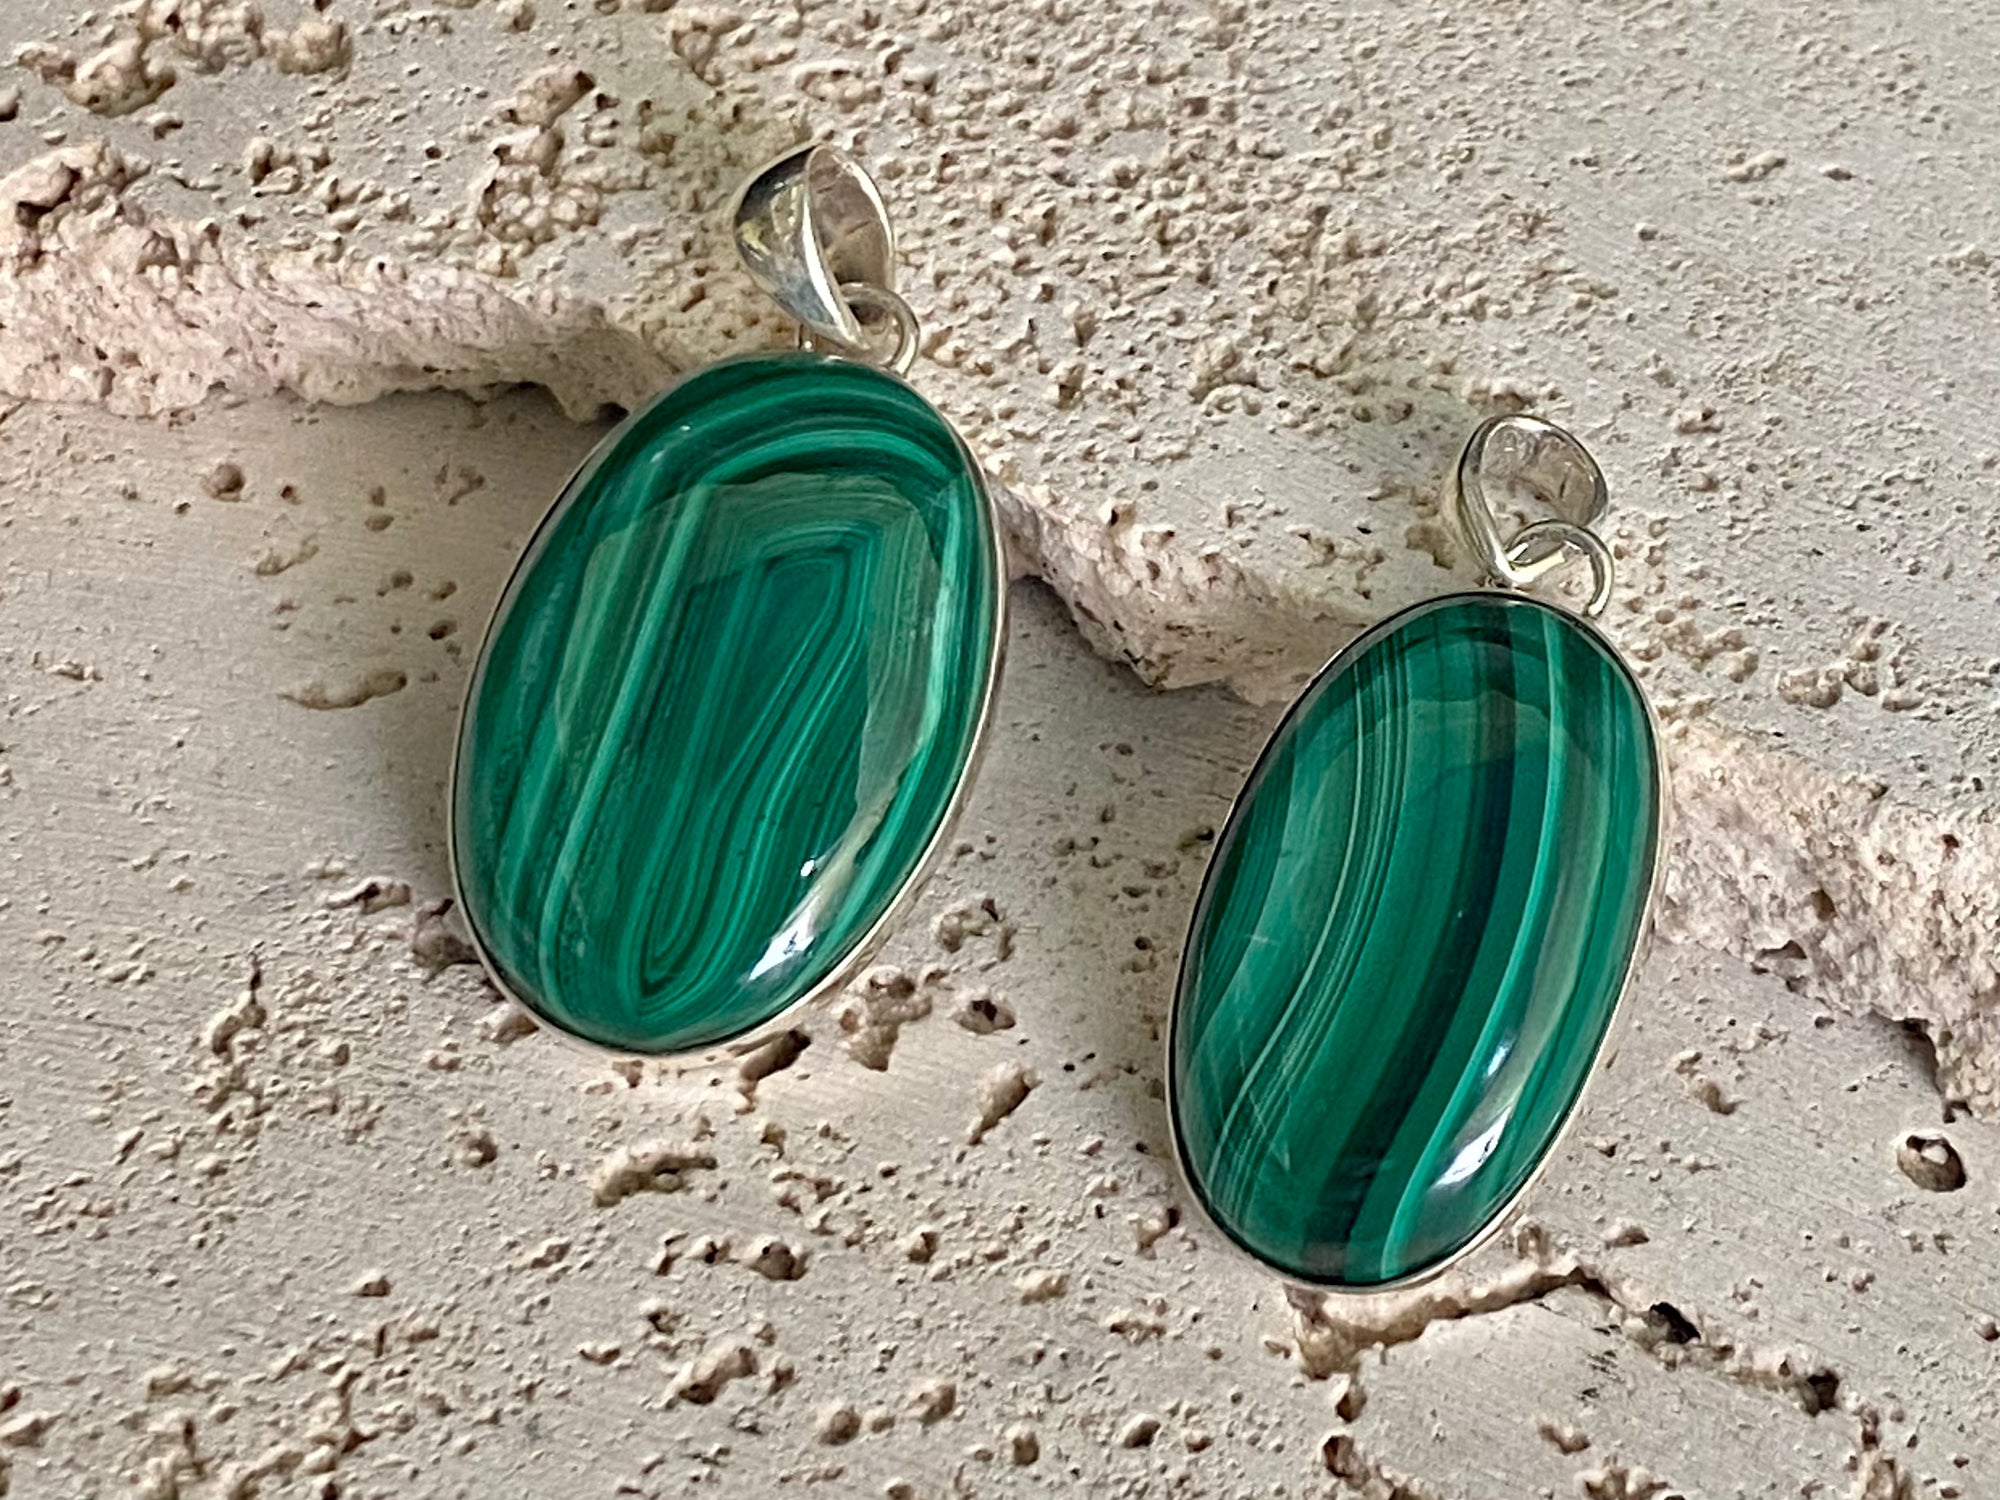 Oval malachite stone pendant set in sterling silver bezel surround, and large bail